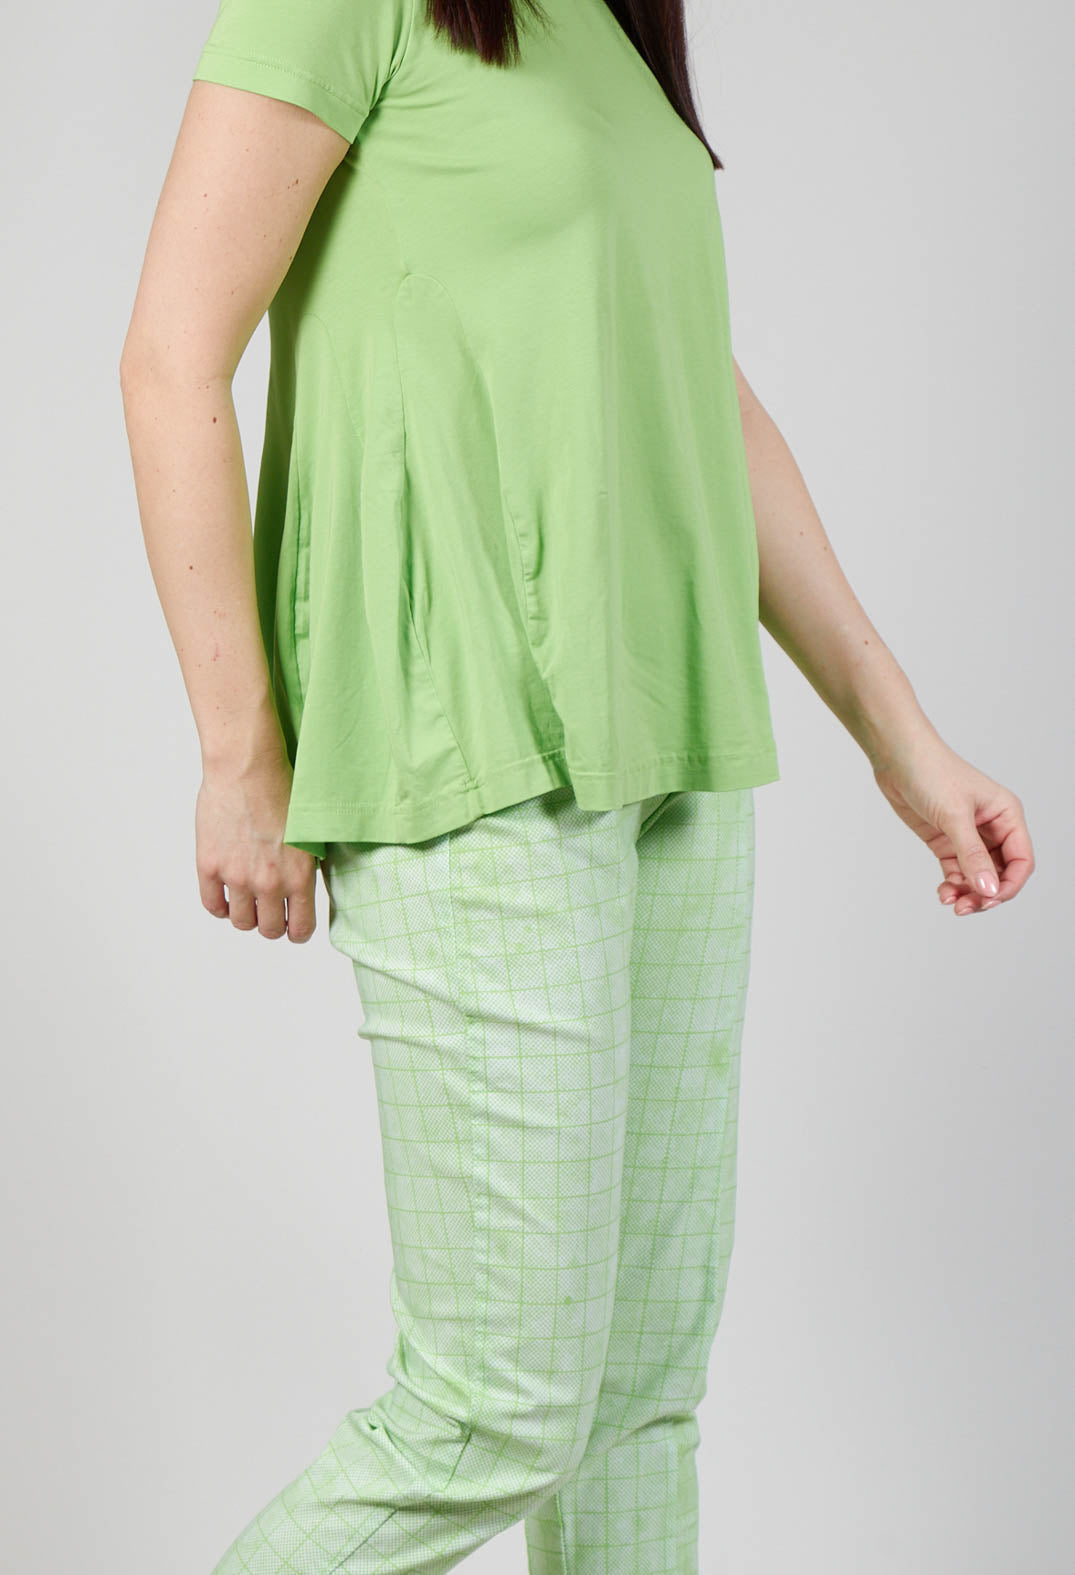 Slim Fit Pull On Trousers in Placed Lime Print